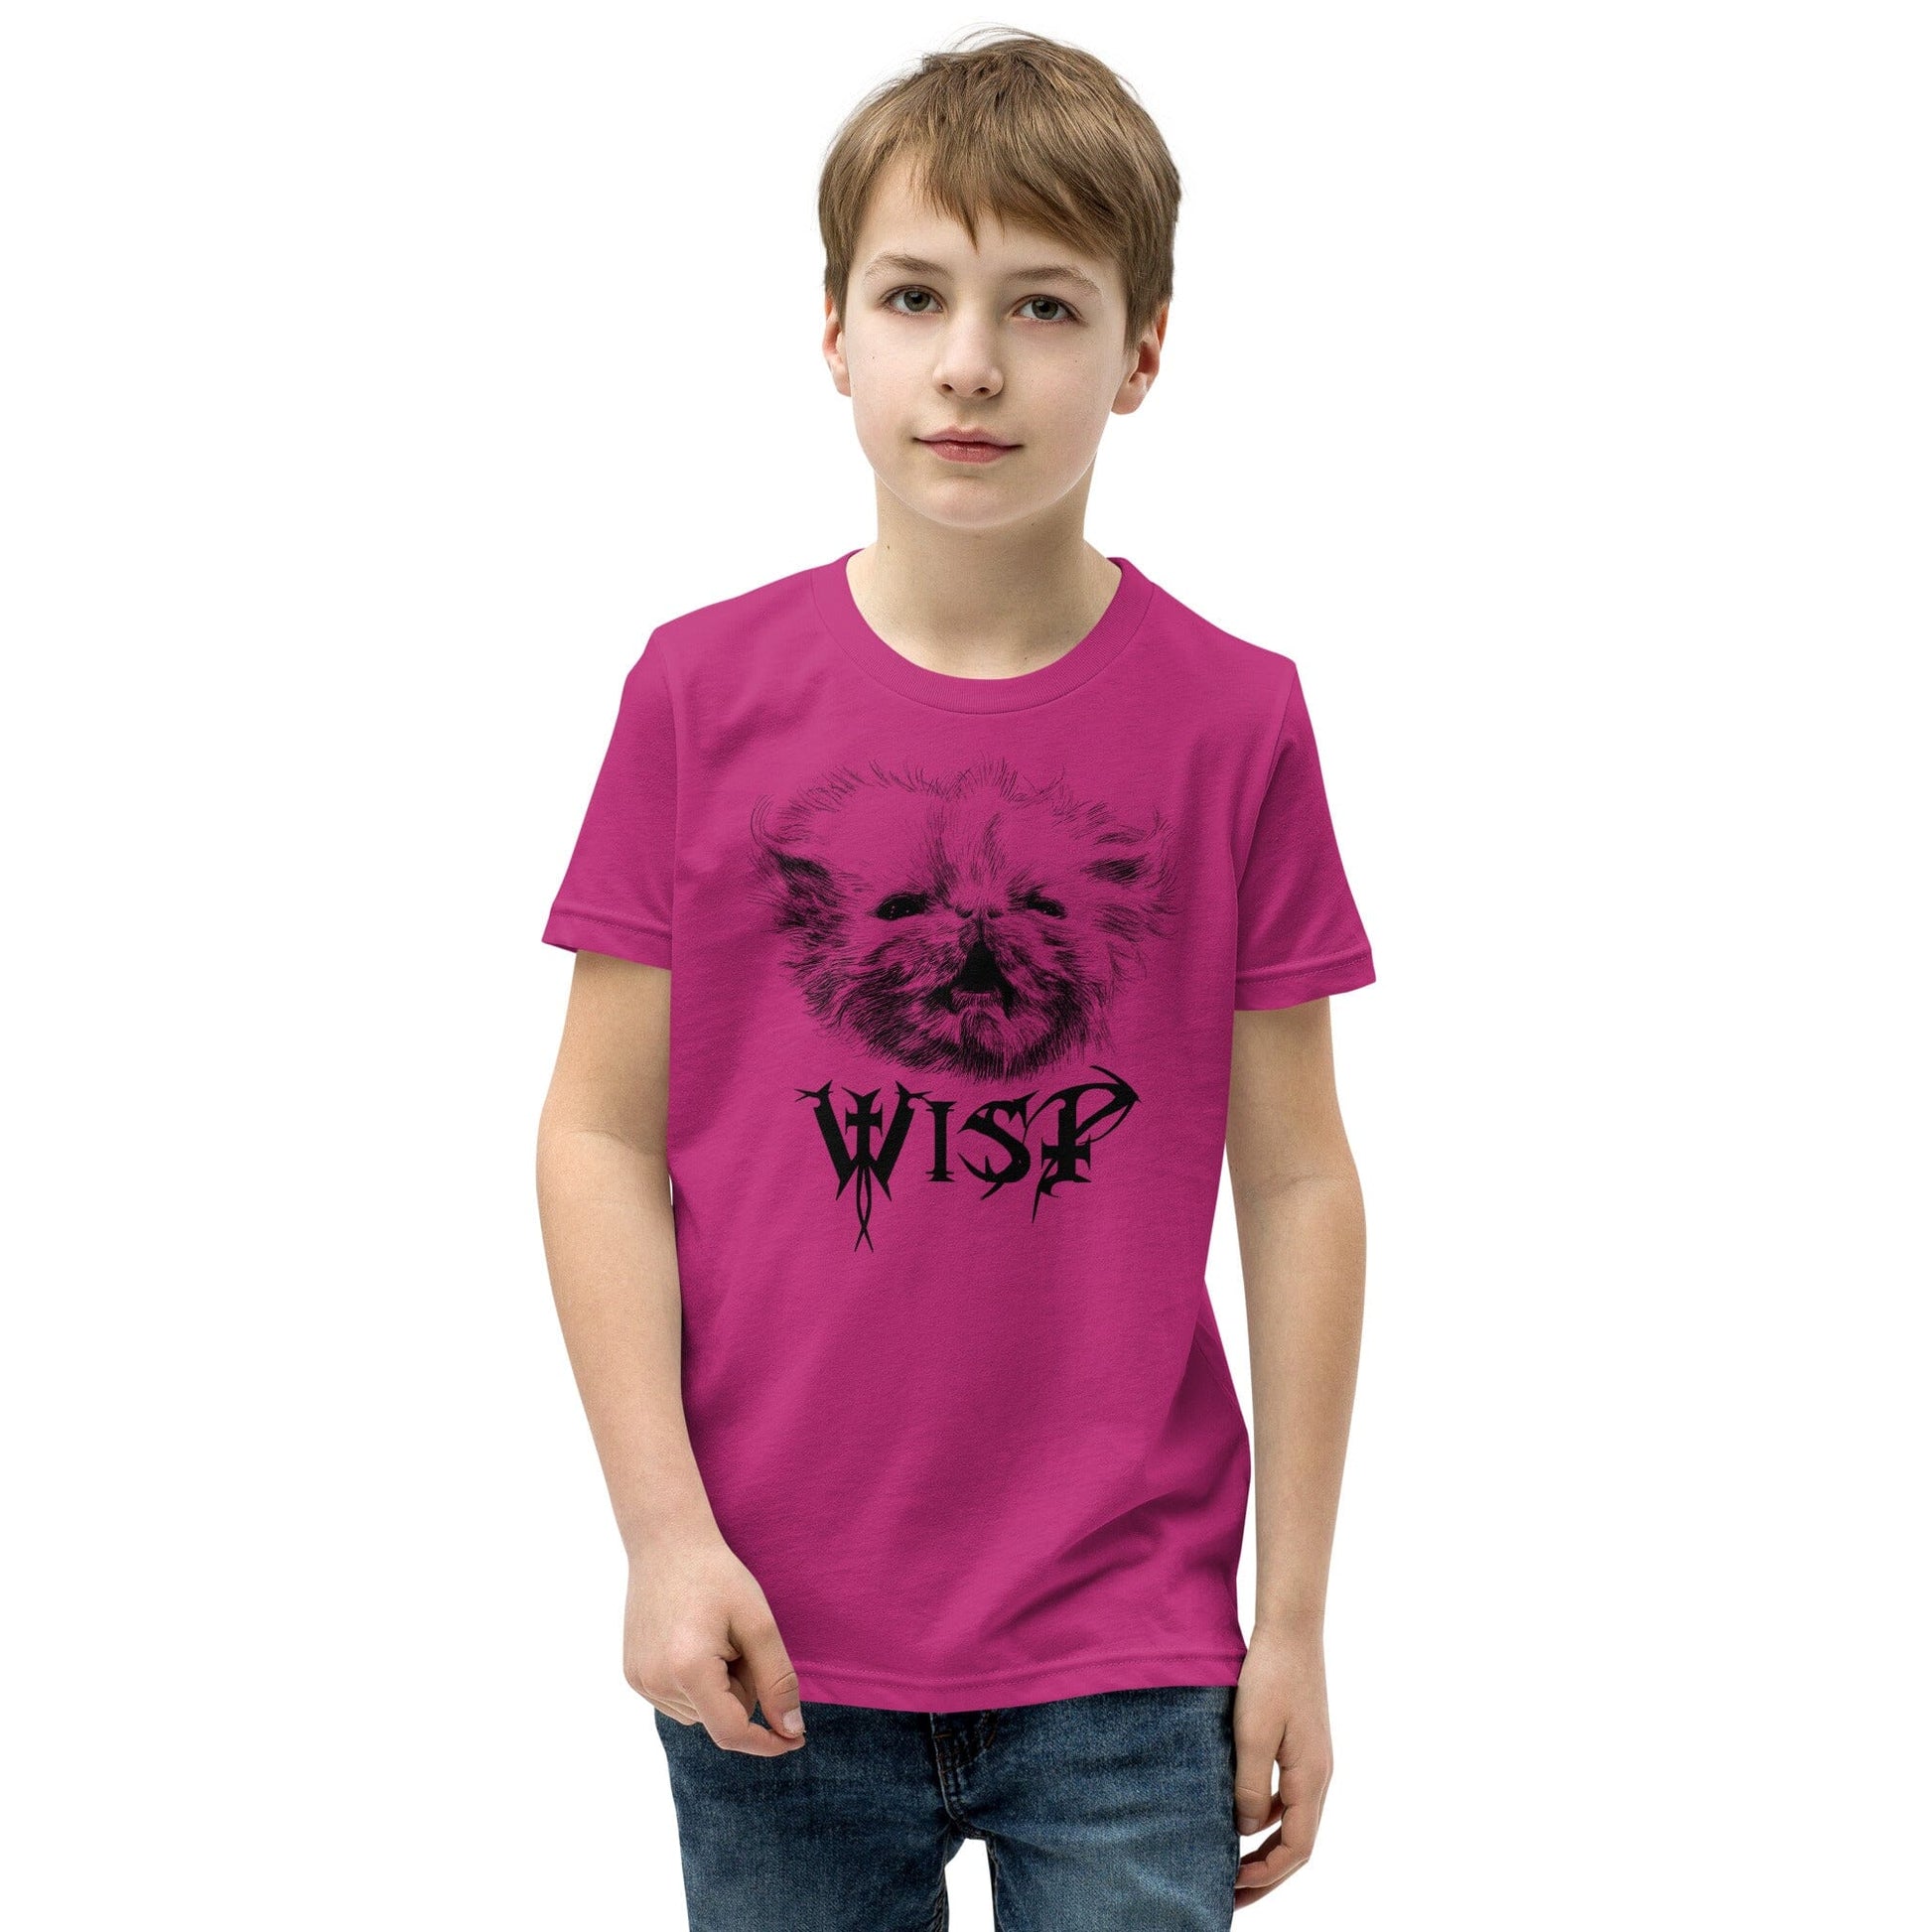 Metal Wisp YOUTH T-Shirt [Unfoiled] (All net proceeds go to Rags to Riches Animal Rescue) JoyousJoyfulJoyness Berry S 